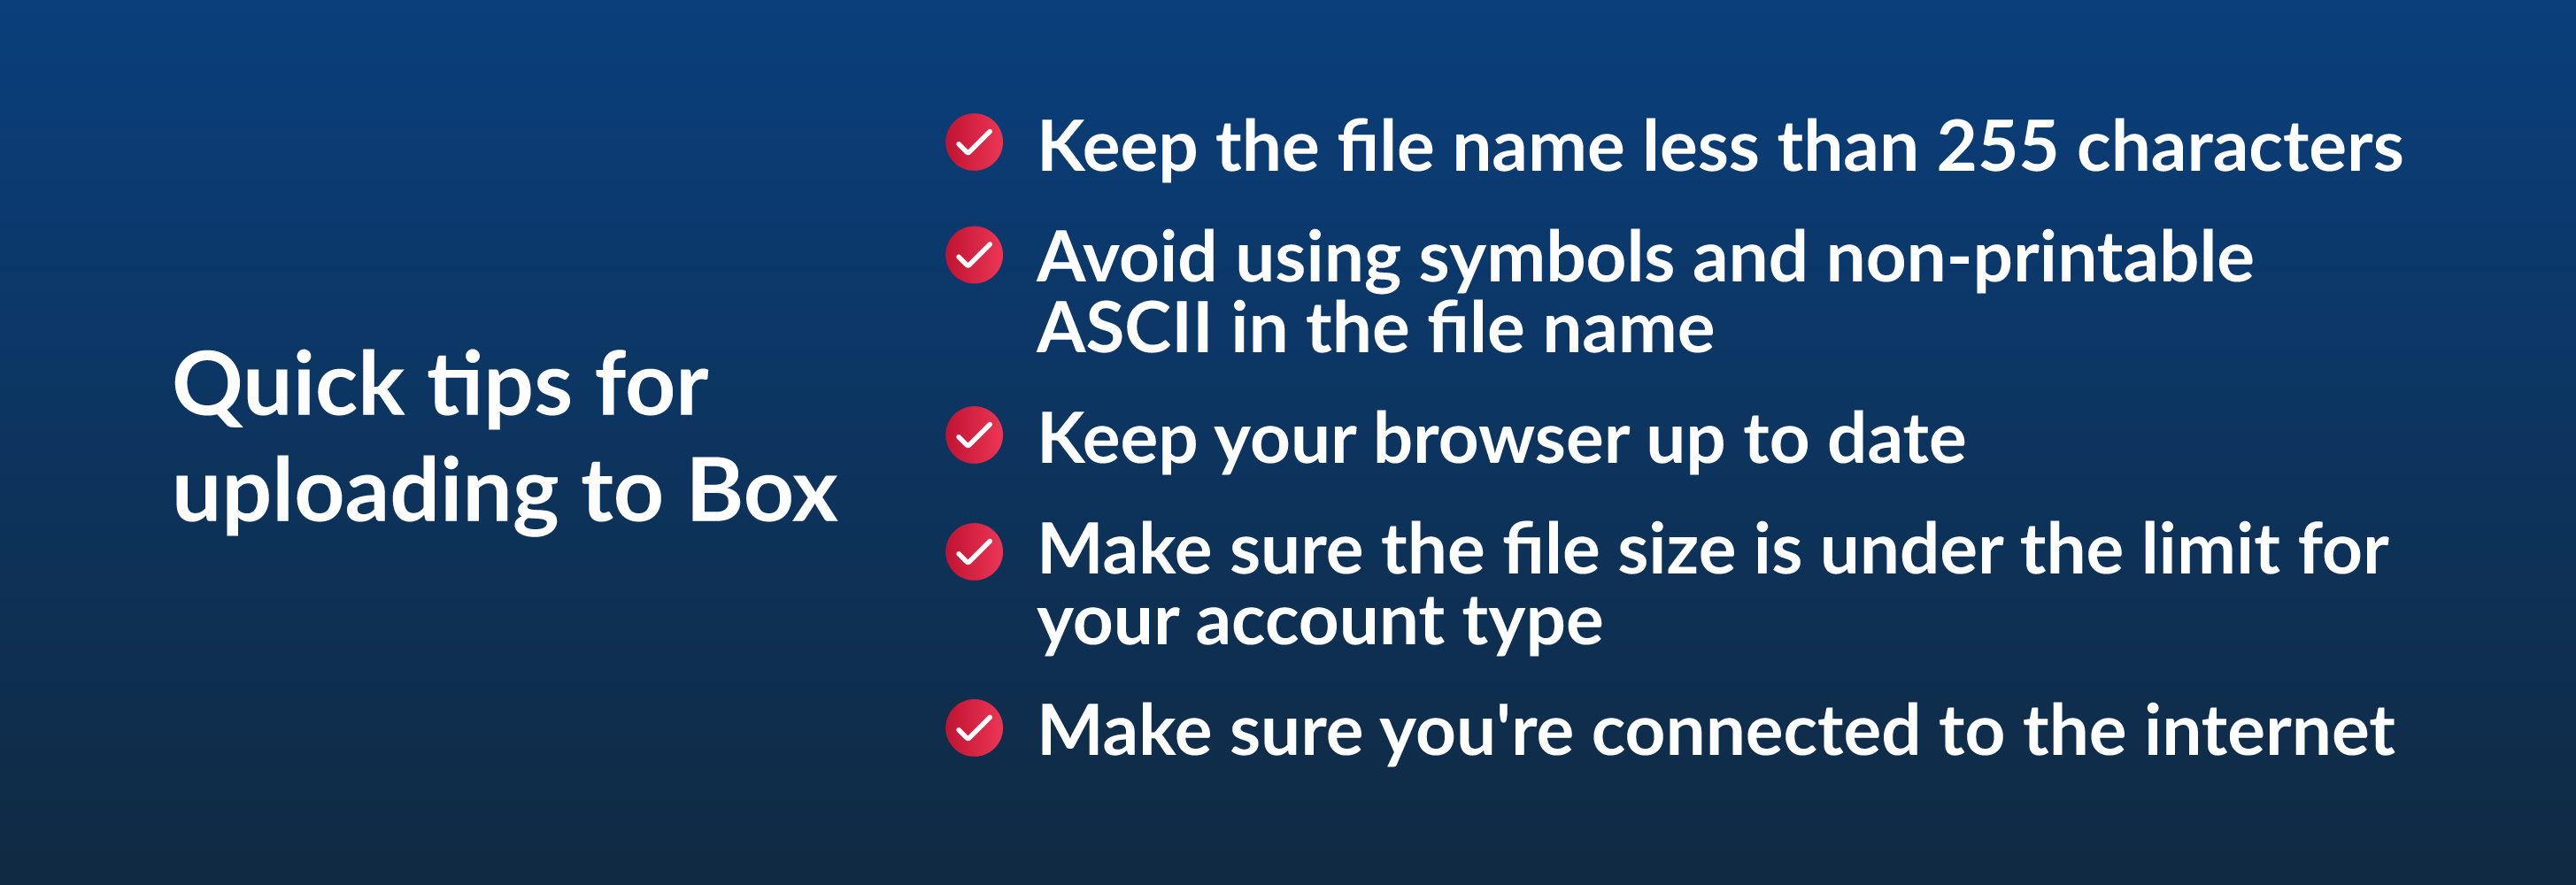 Quick tips for uploading to Box - keep the file name less than 255 characters, avoid using symbols and non-printable ASCII in the file name, keep your browser up to date, make sure the file size is under the limit for your account type, make sure you're connected to the internet